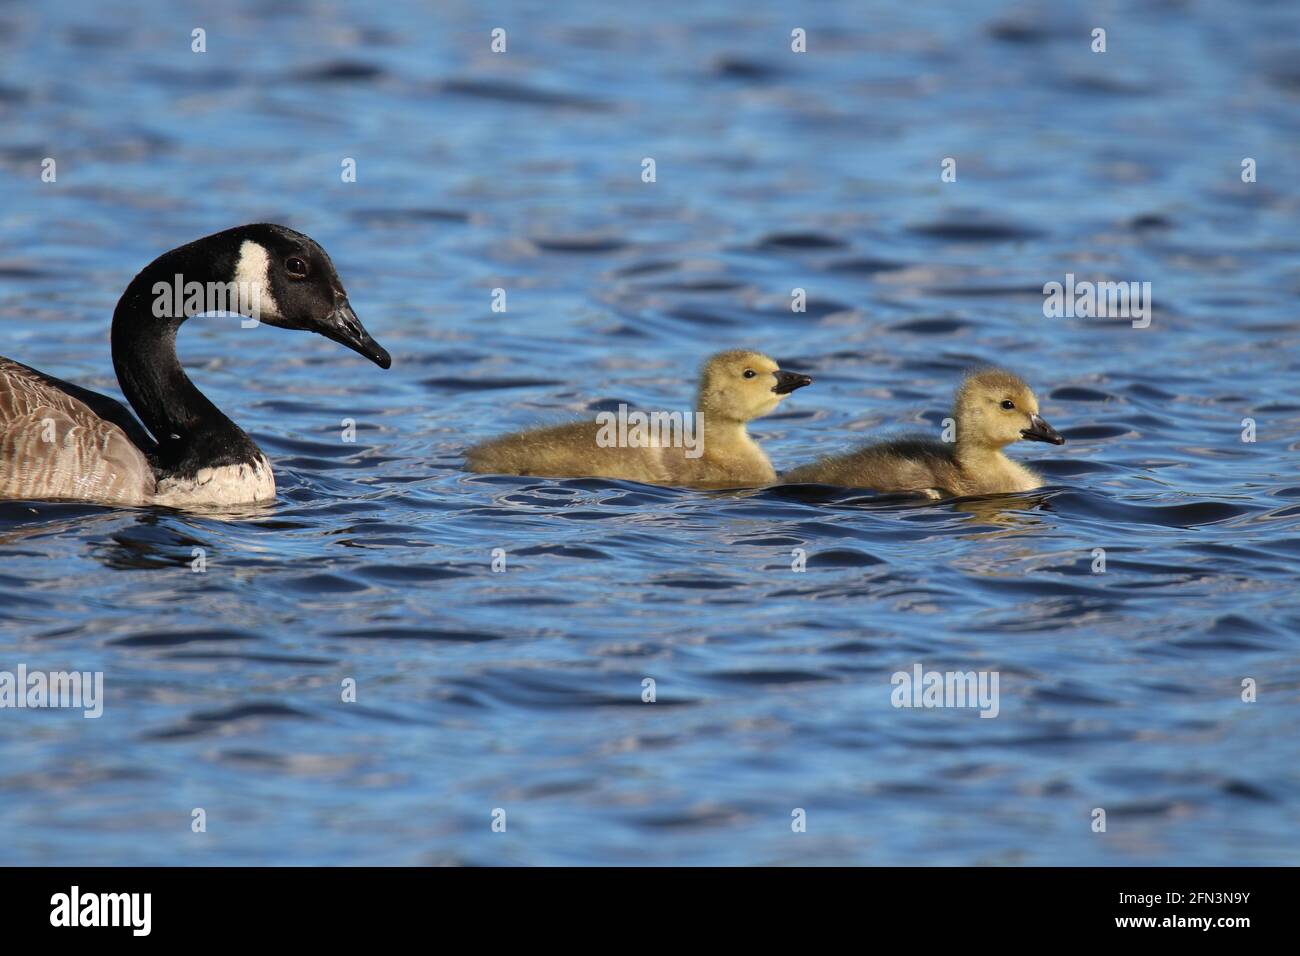 Two young Canada goose goslings swimming with the parent goose Stock Photo